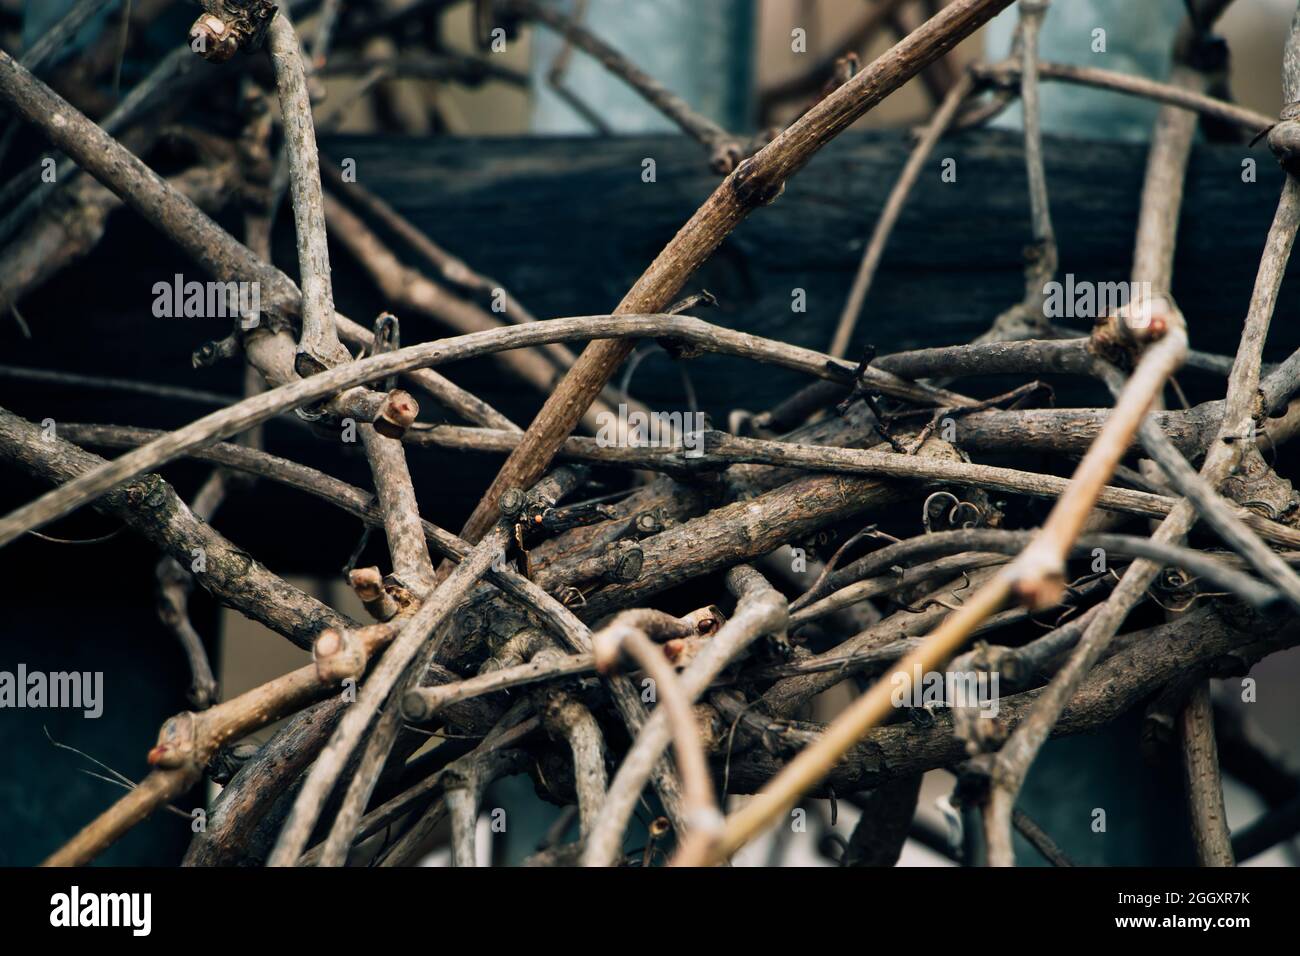 Dry vine branches. Autumn or winter in the vineyards. Hedge made of dried twisted twigs. Stock Photo